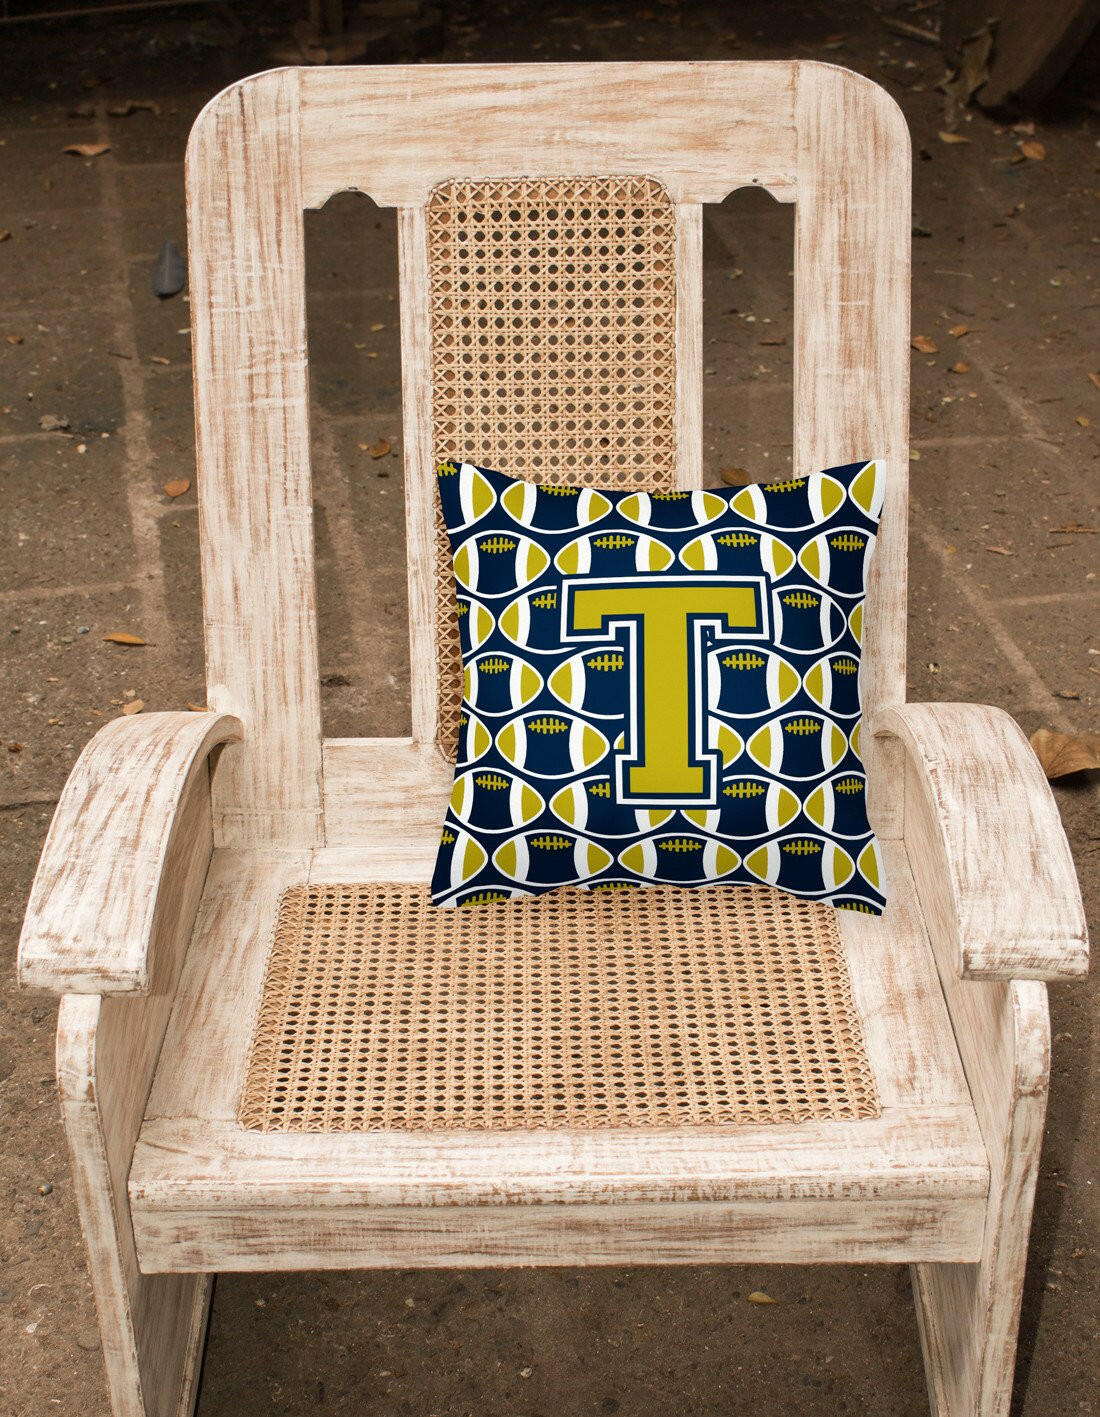 Letter T Football Blue and Gold Fabric Decorative Pillow CJ1074-TPW1414 by Caroline's Treasures